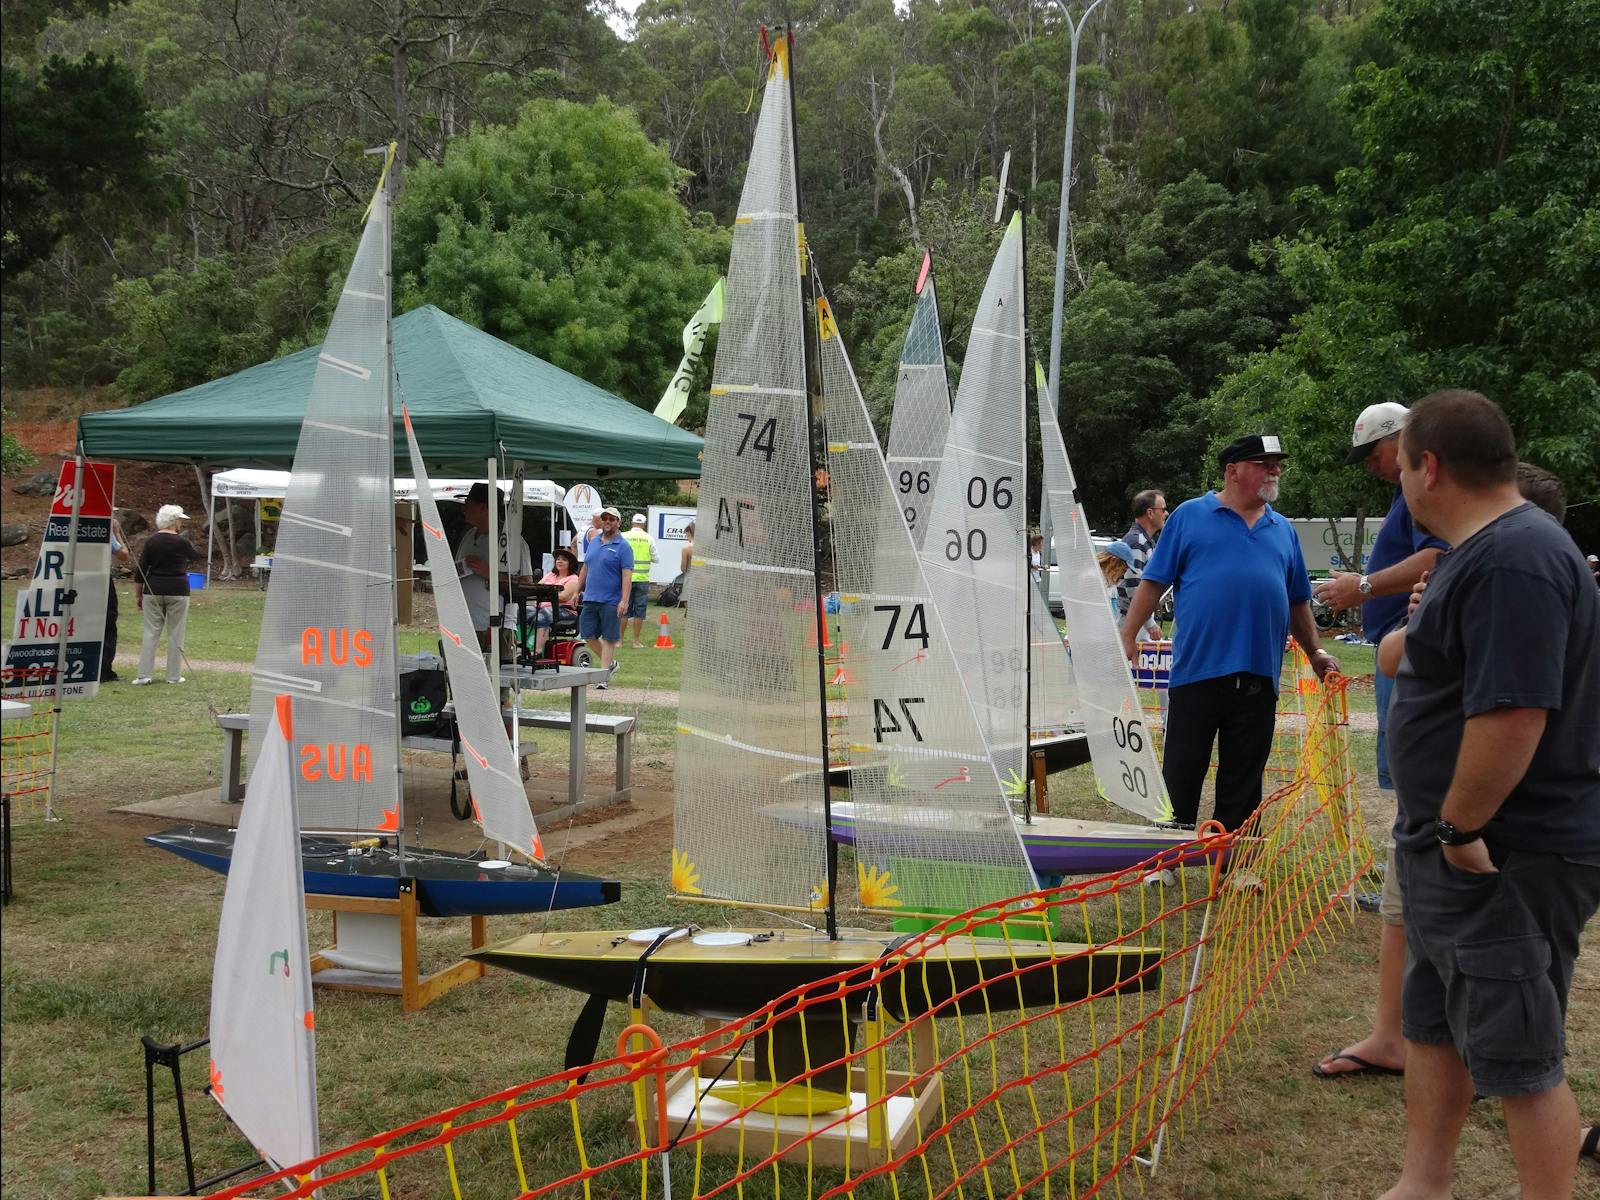 Model Boats at Henley-on-Mersey